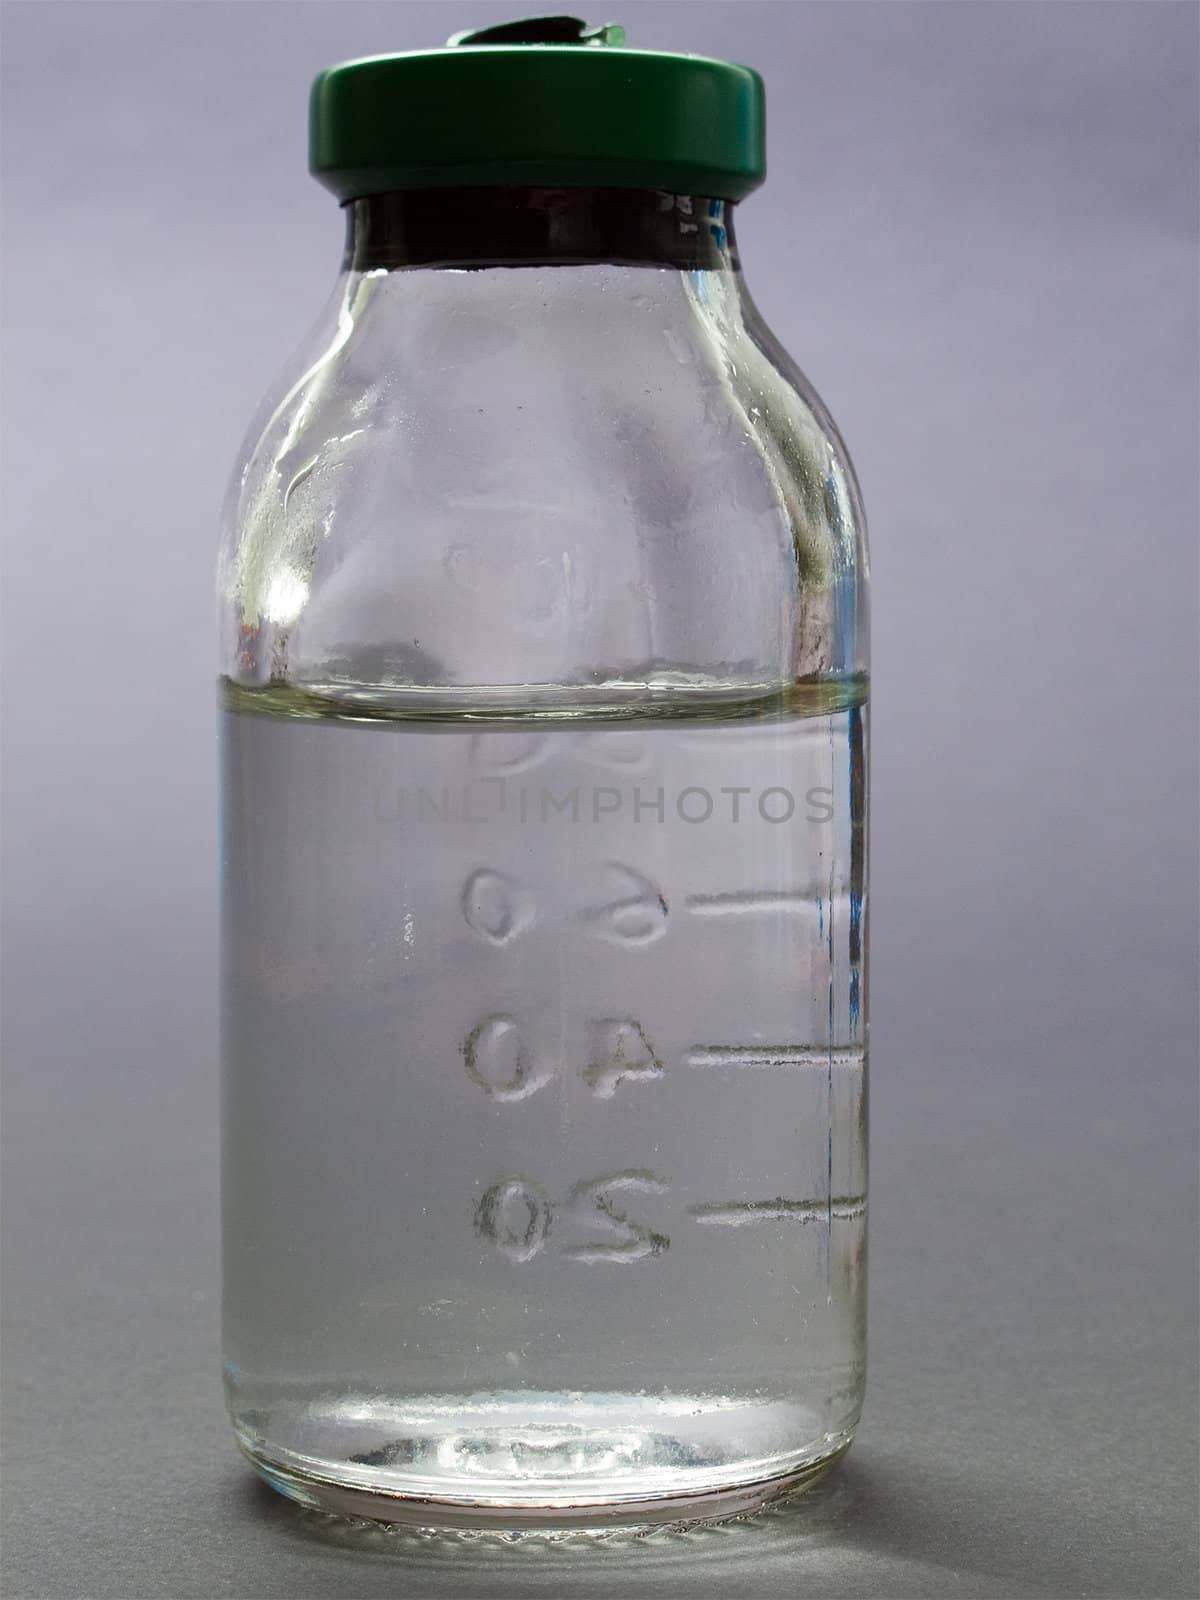 Medicine vial for healthcare science research test